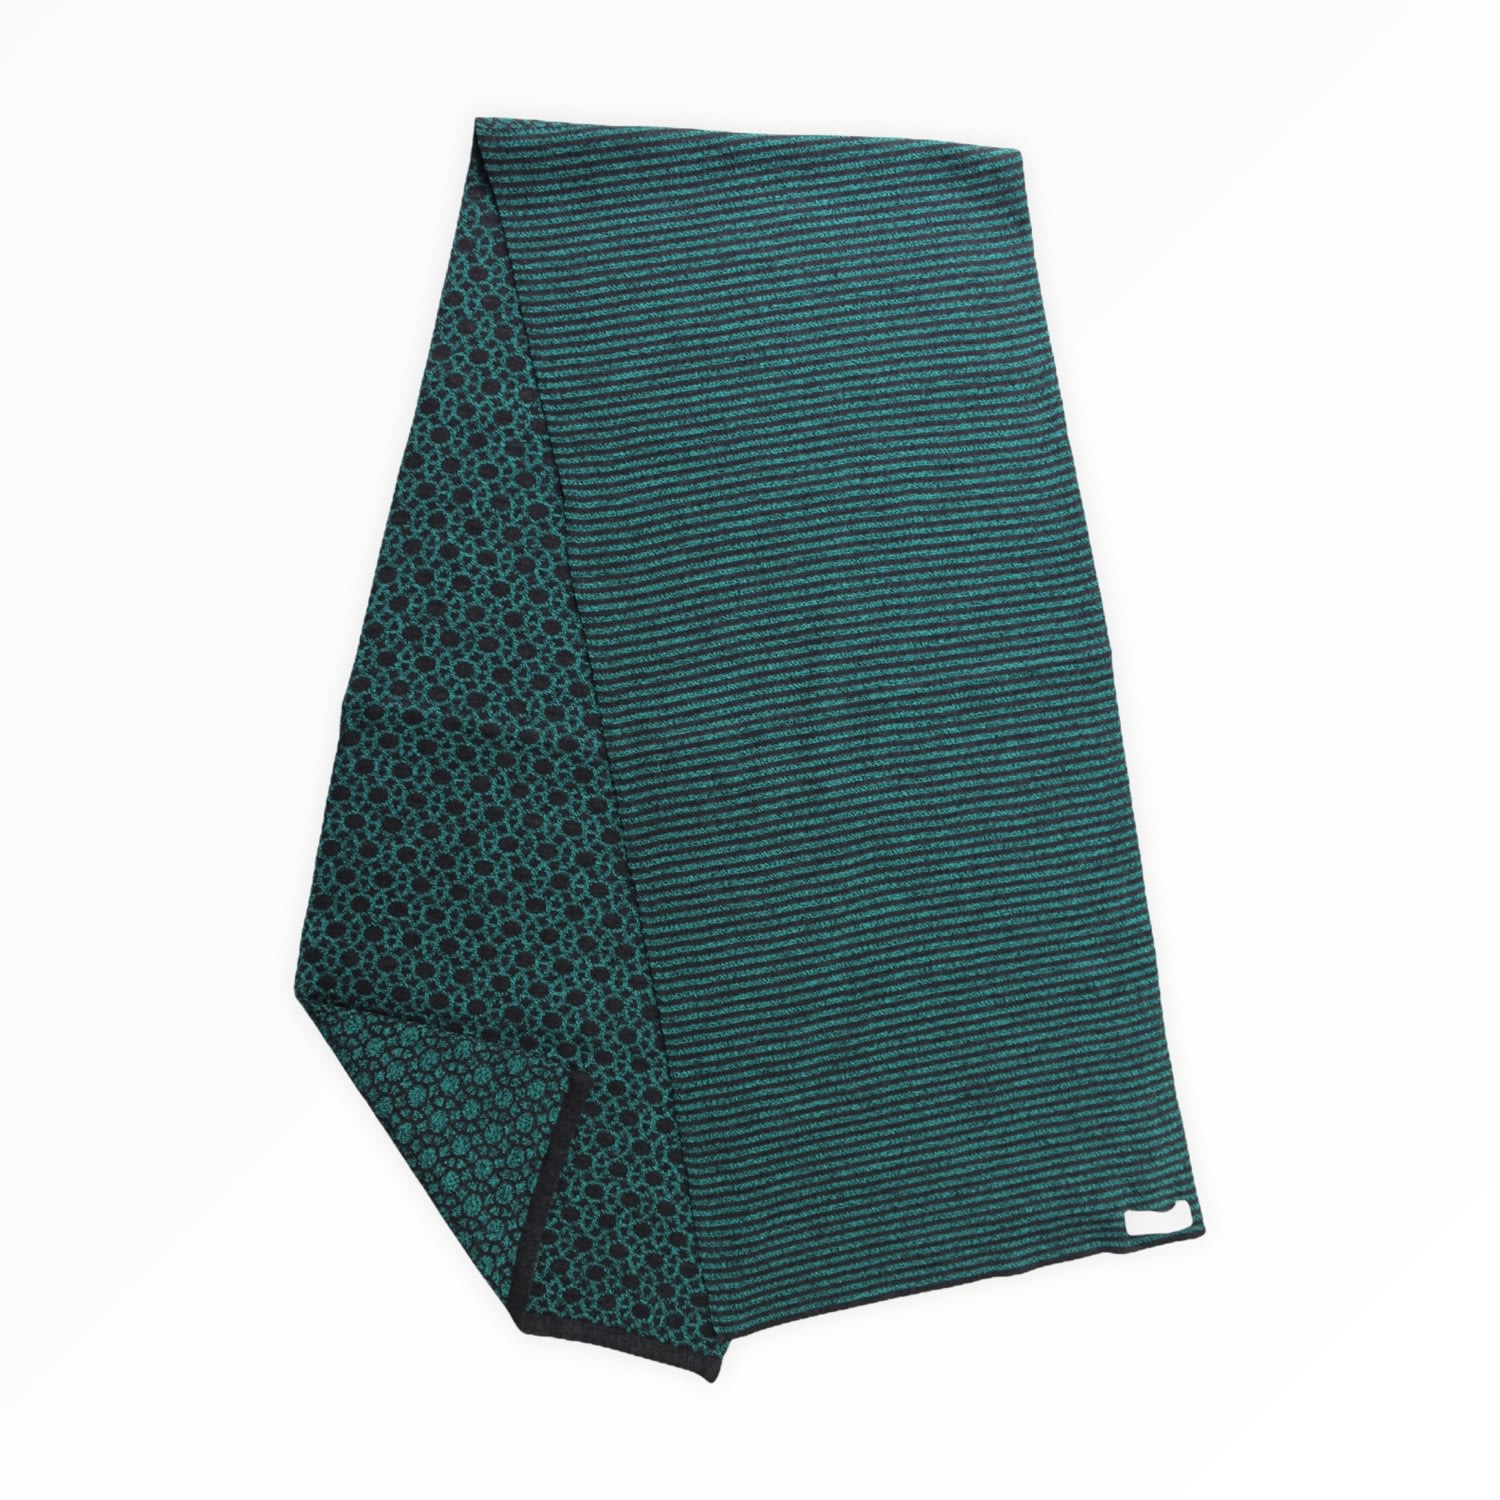 Women’s Green / Black Unisex Double Side Scarf - Charcoal, Forrest Green One Size Maria Aristidou